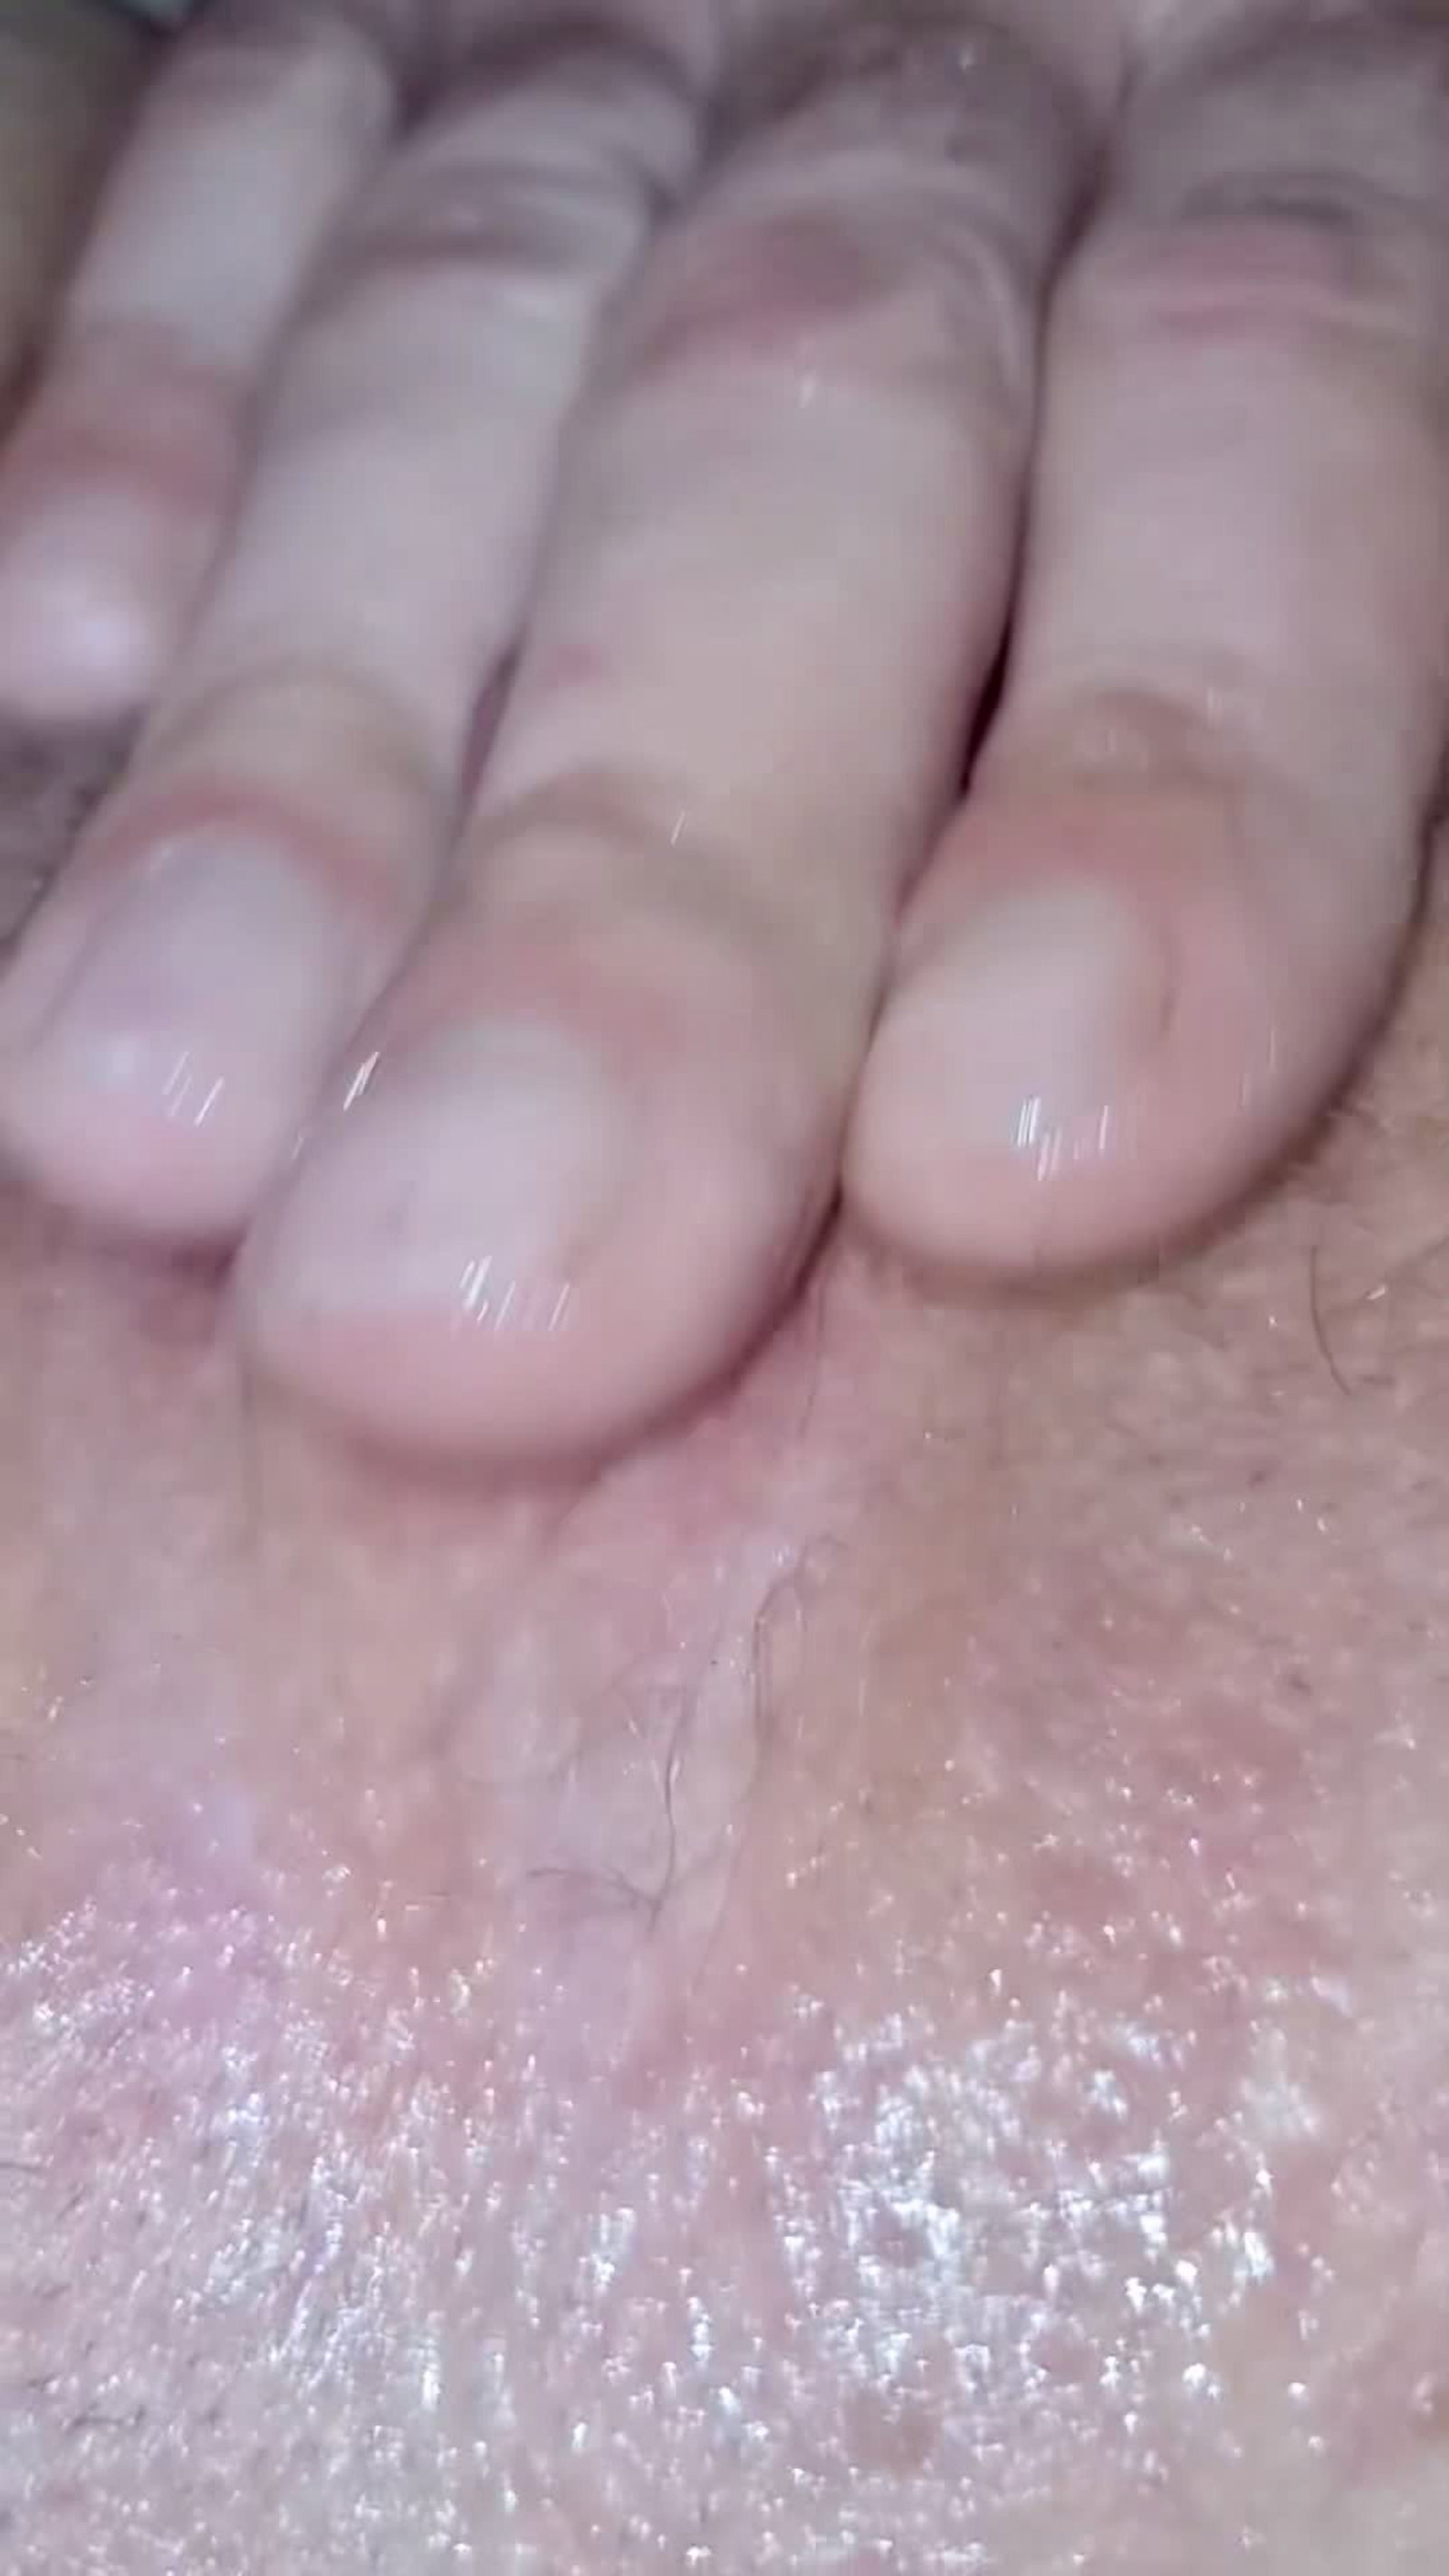 Share this post if you'd lick my pussy?